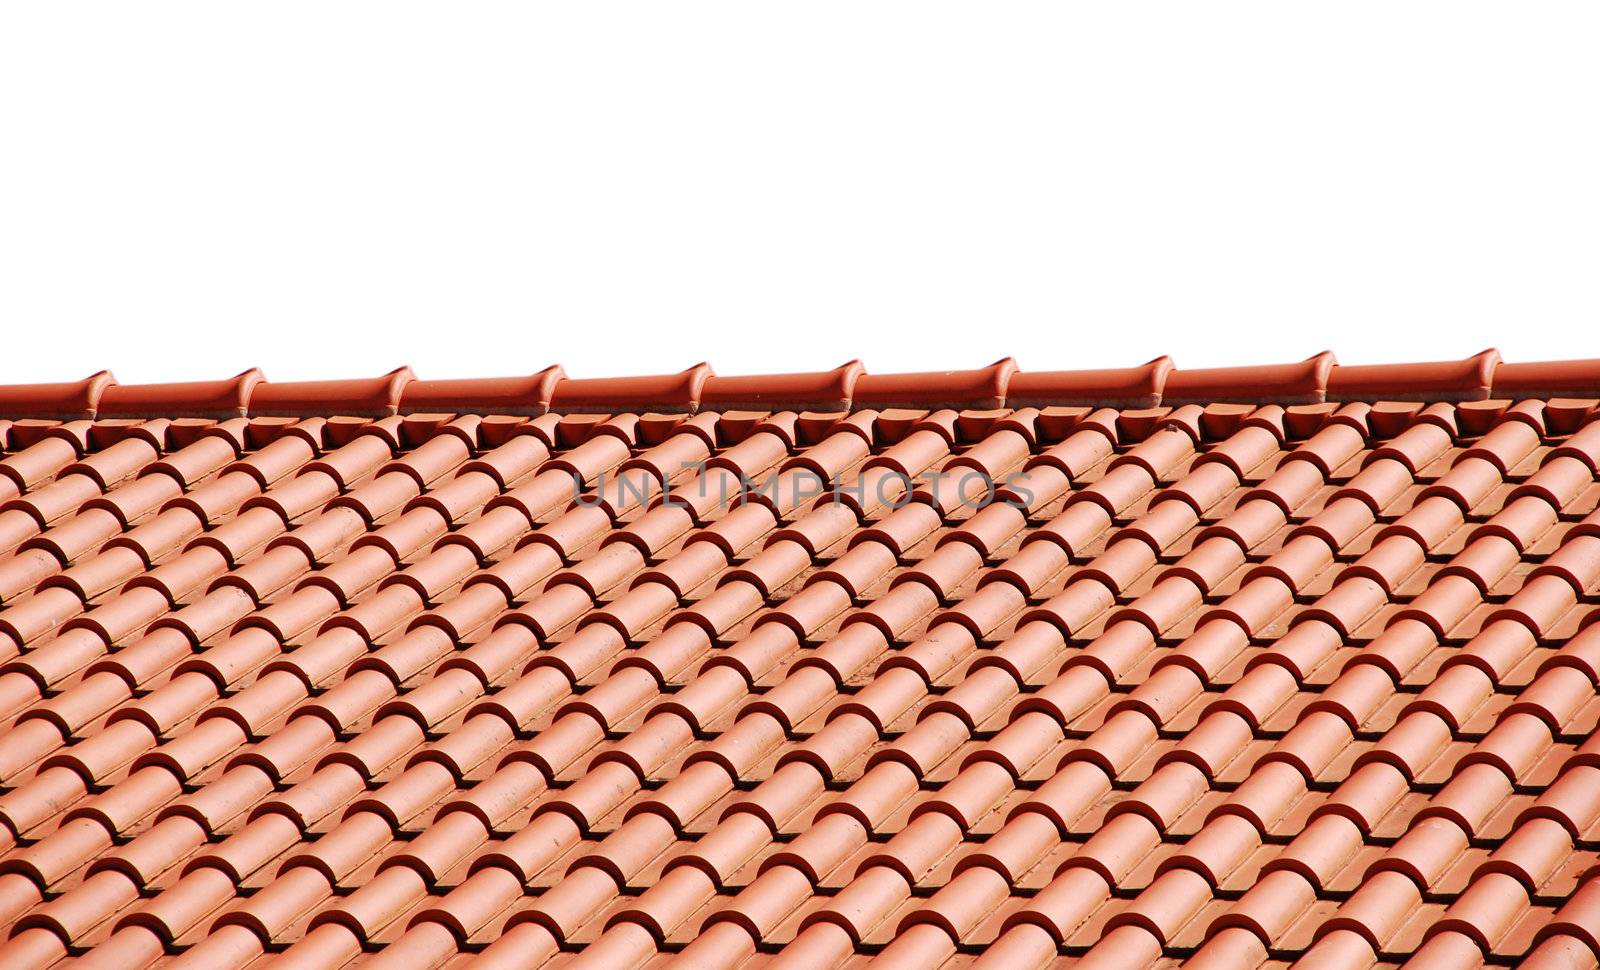 orange tiles on the roof of a house (isolated on white background)